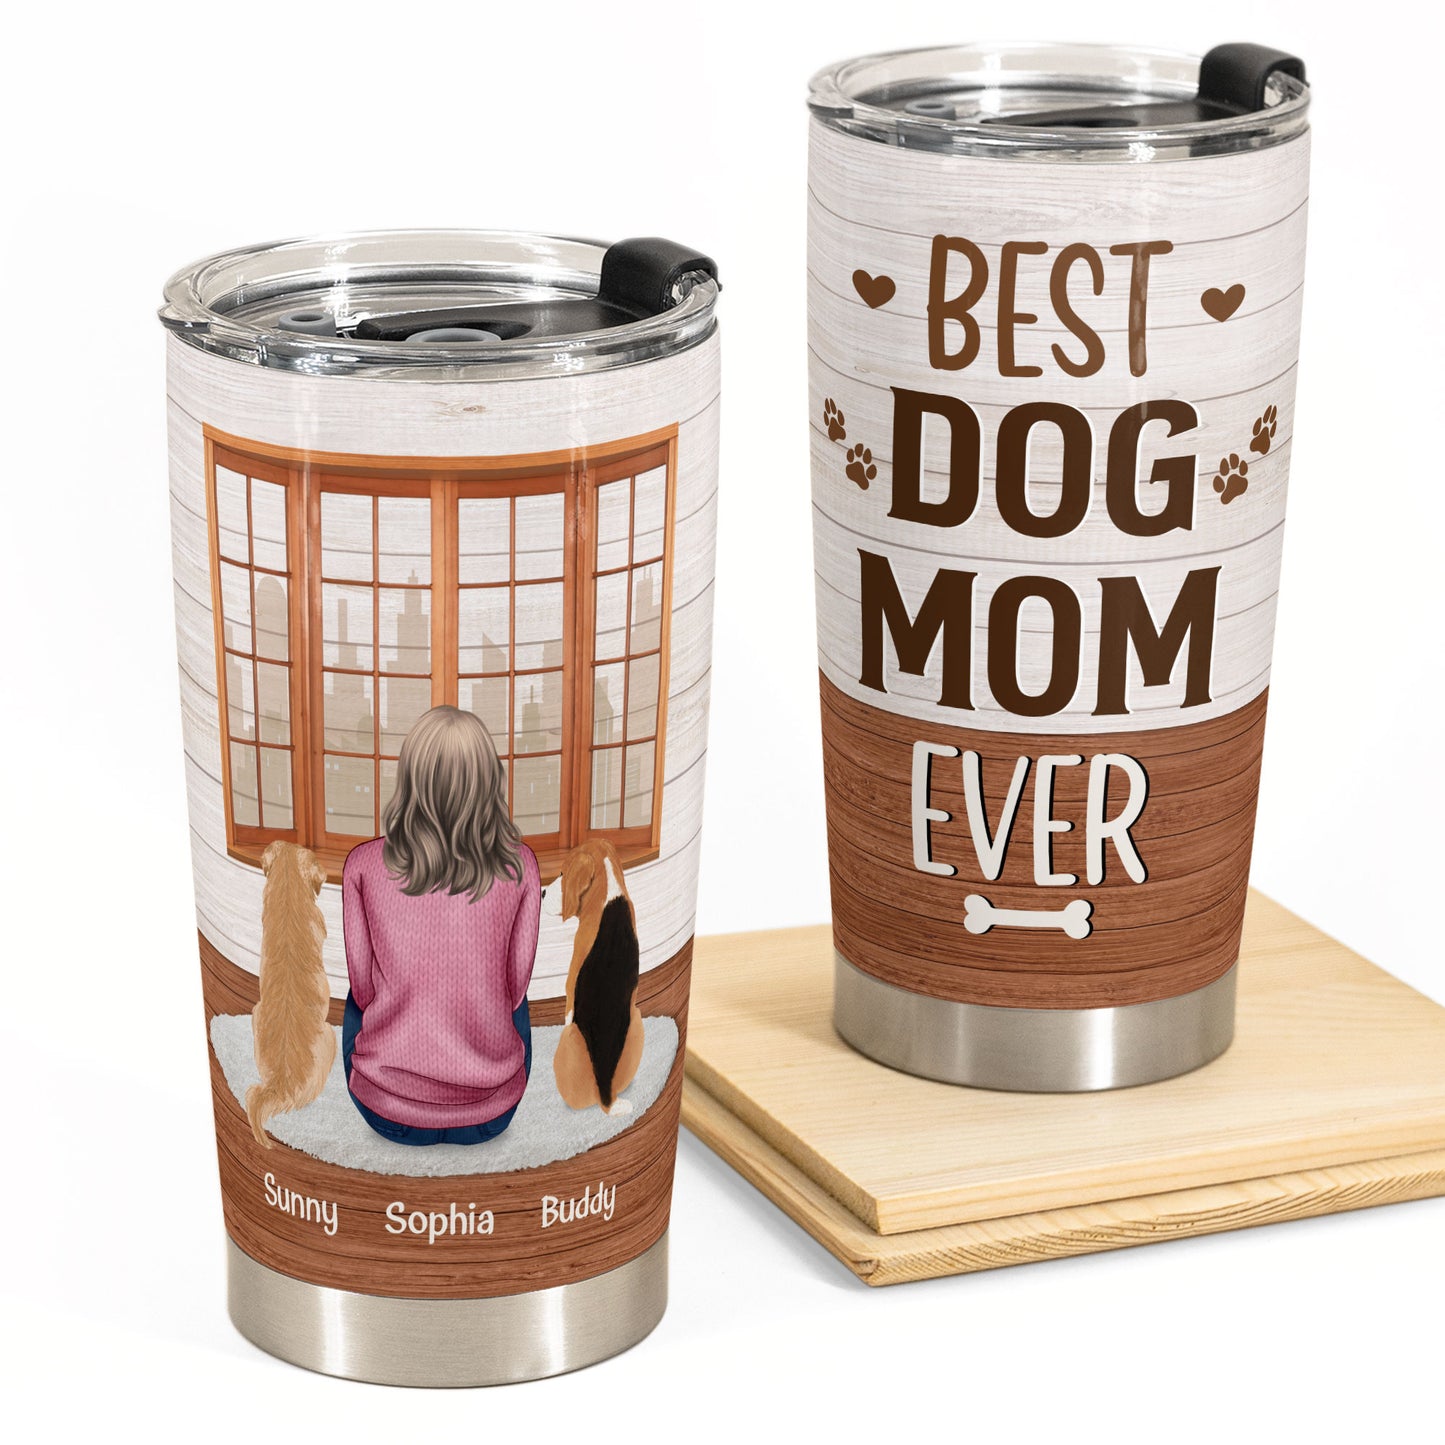 Best Dog Mom Ever - Personalized Tumbler Cup - Birthday Gift For Dog Mom, Dog Lovers, Dog Mama